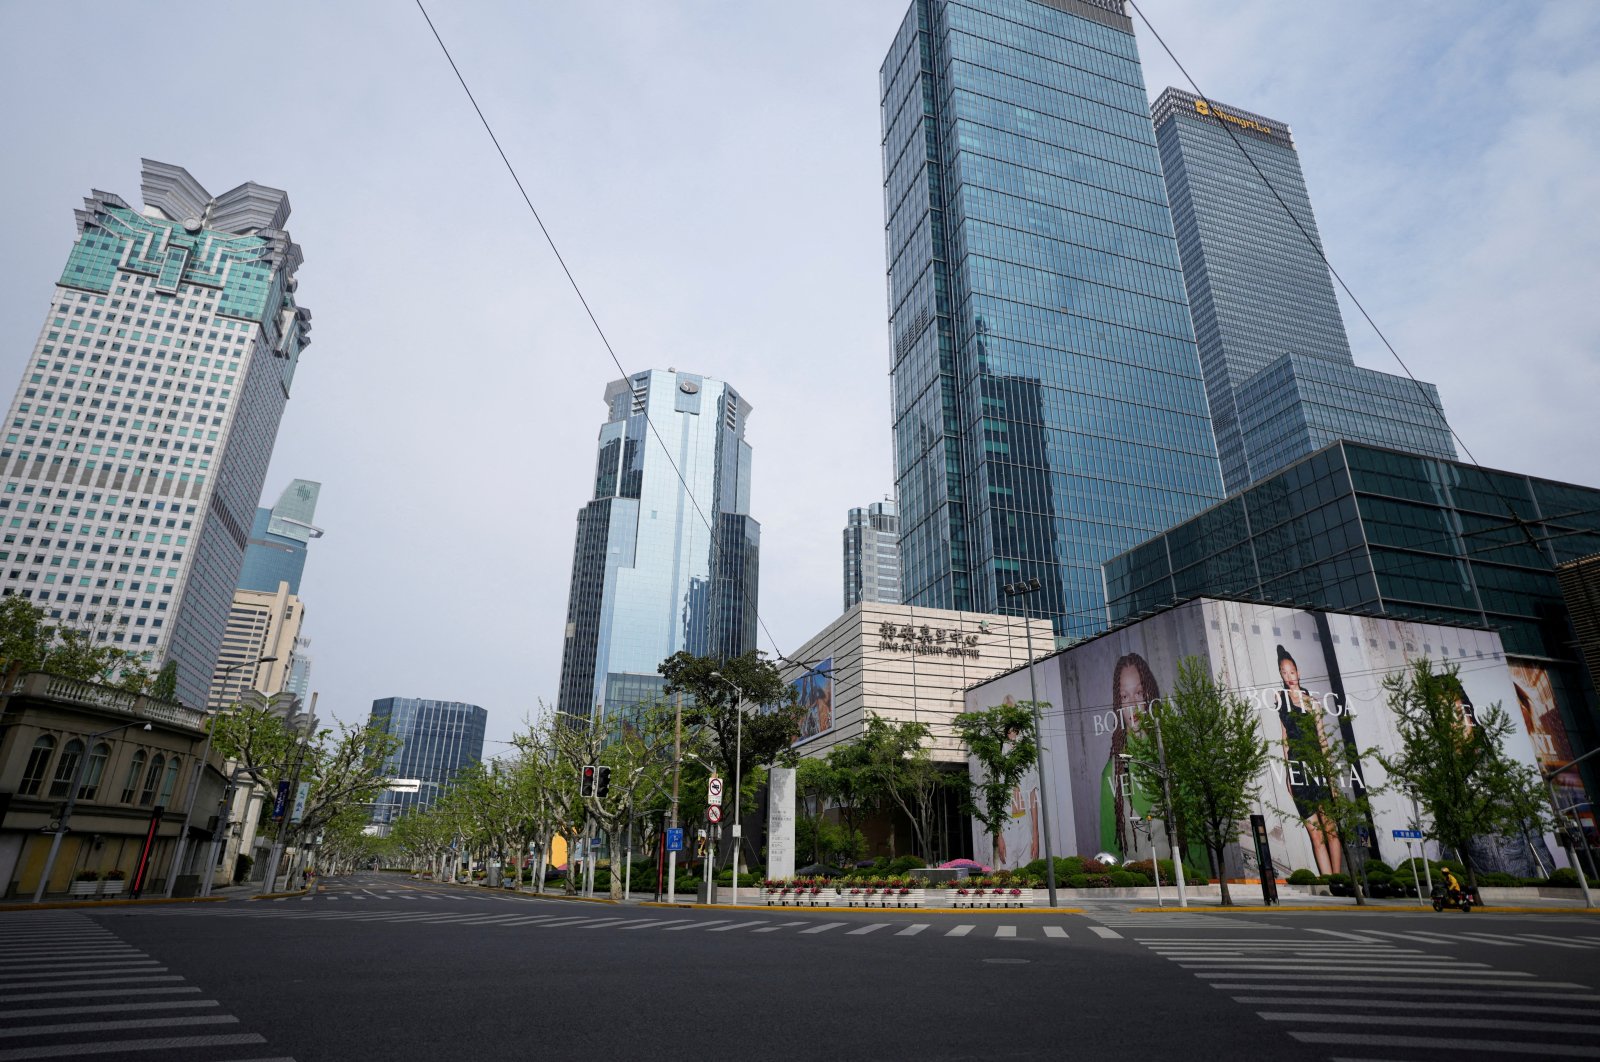 An empty road is seen in the Shanghai Central Business District (CBD) during a lockdown, amid the coronavirus pandemic, in Shanghai, China, April 16, 2022. (Reuters Photo)